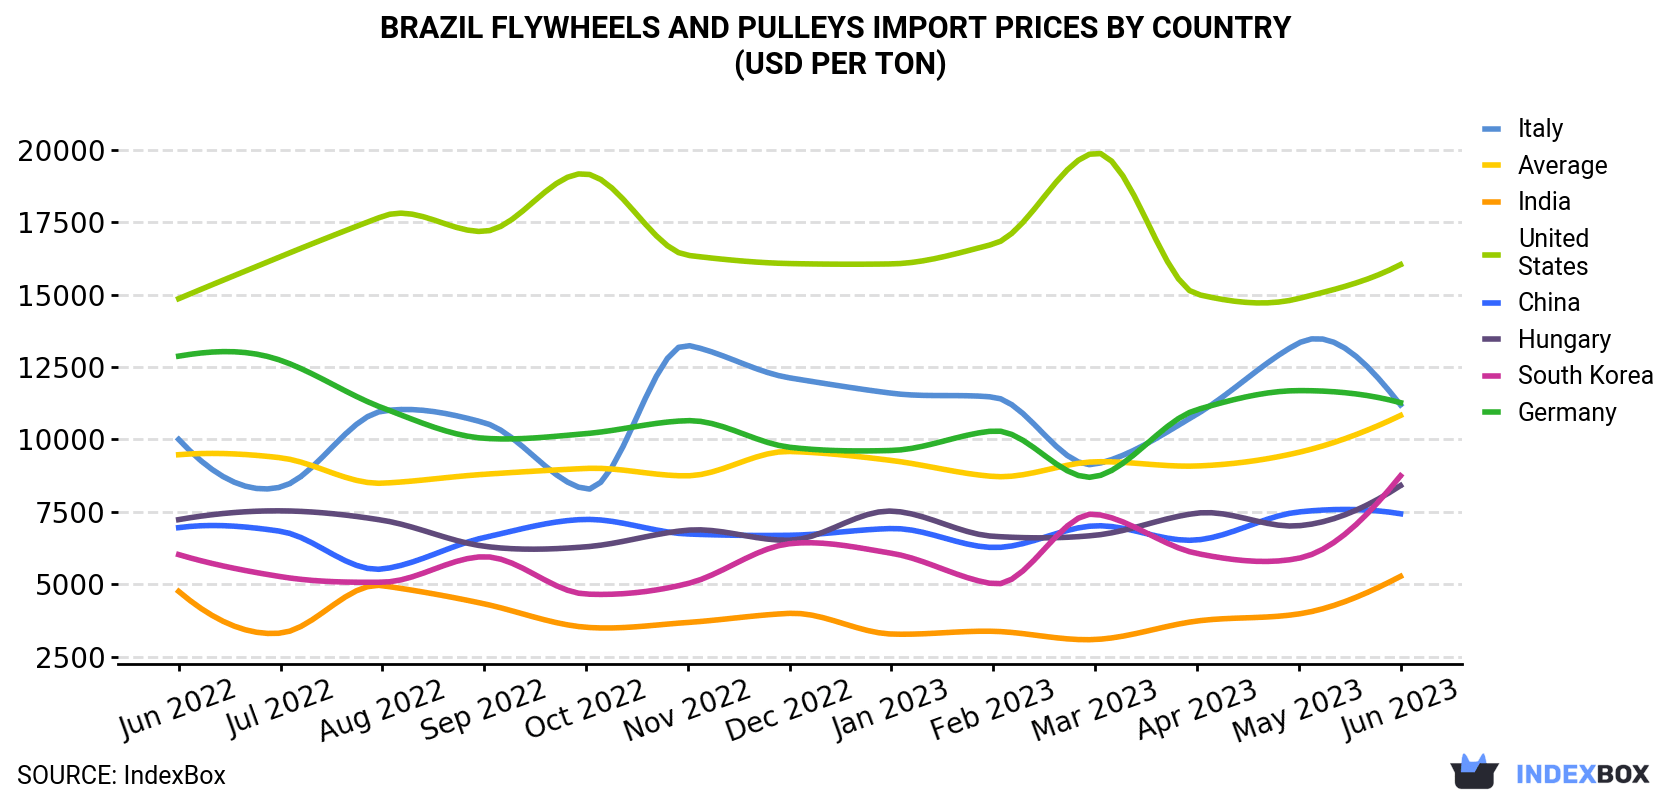 Brazil Flywheels And Pulleys Import Prices By Country (USD Per Ton)